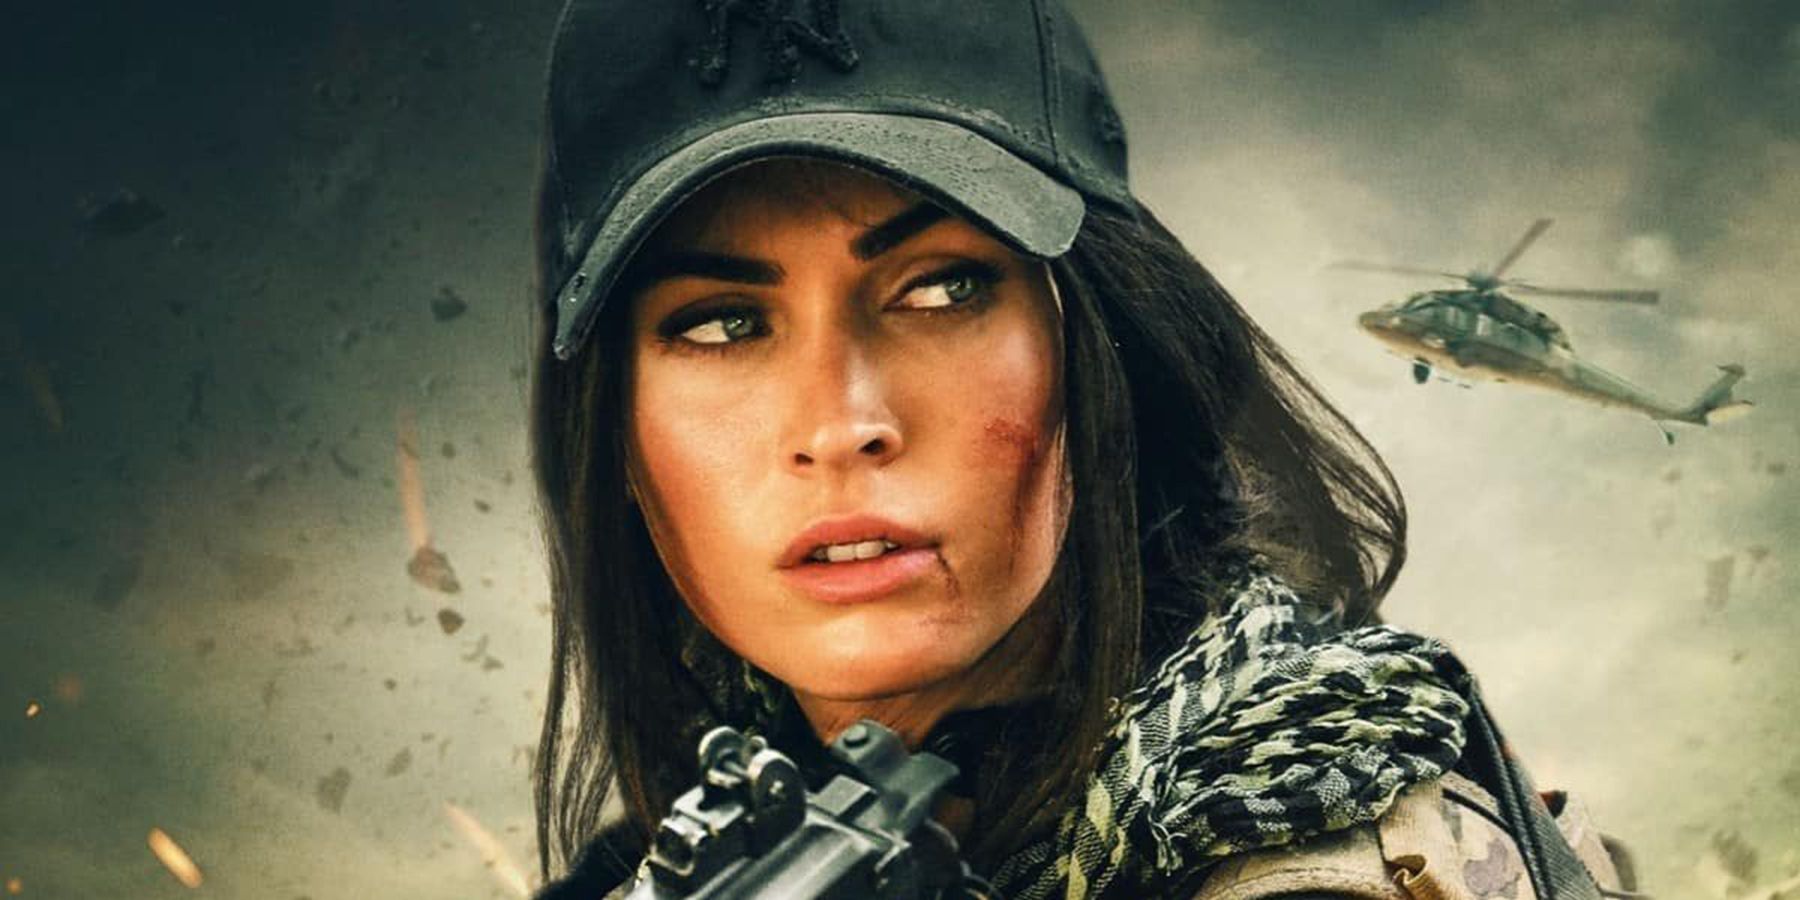 The Expendables 4 Adds Megan Fox Alongside Sylvester Stallone